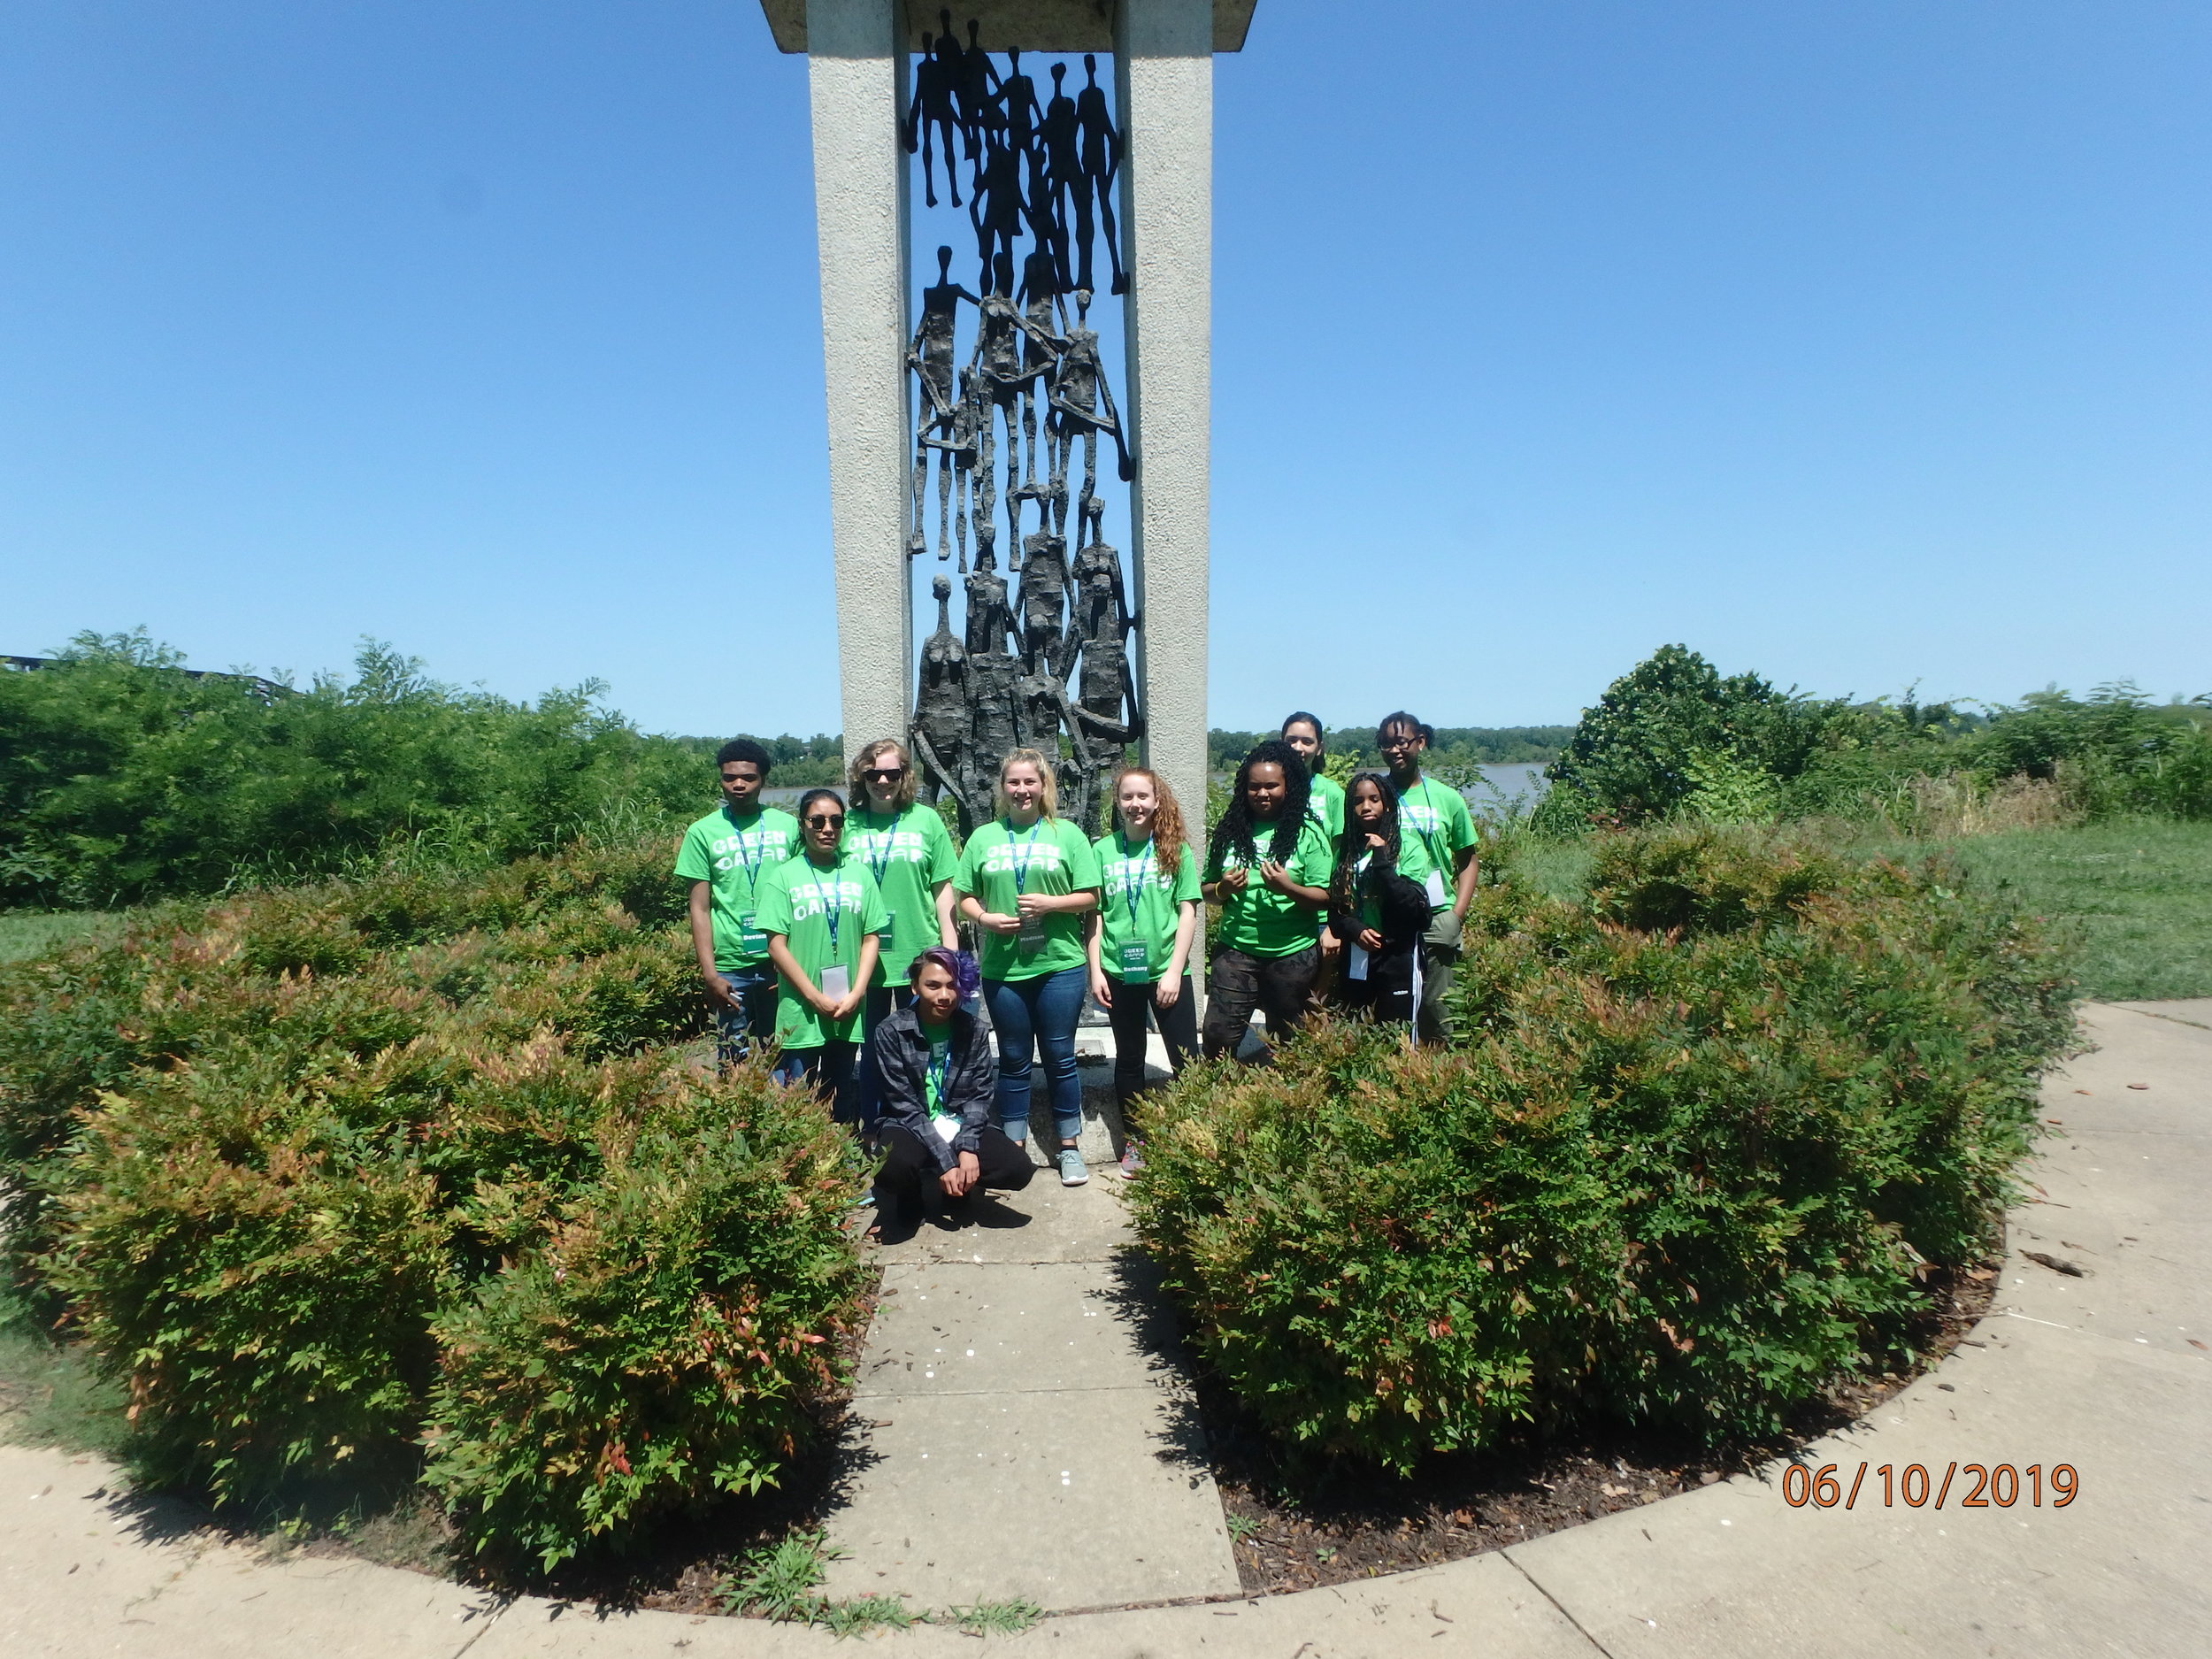 Day 1: Martyr Park, Memphis and MS4 history